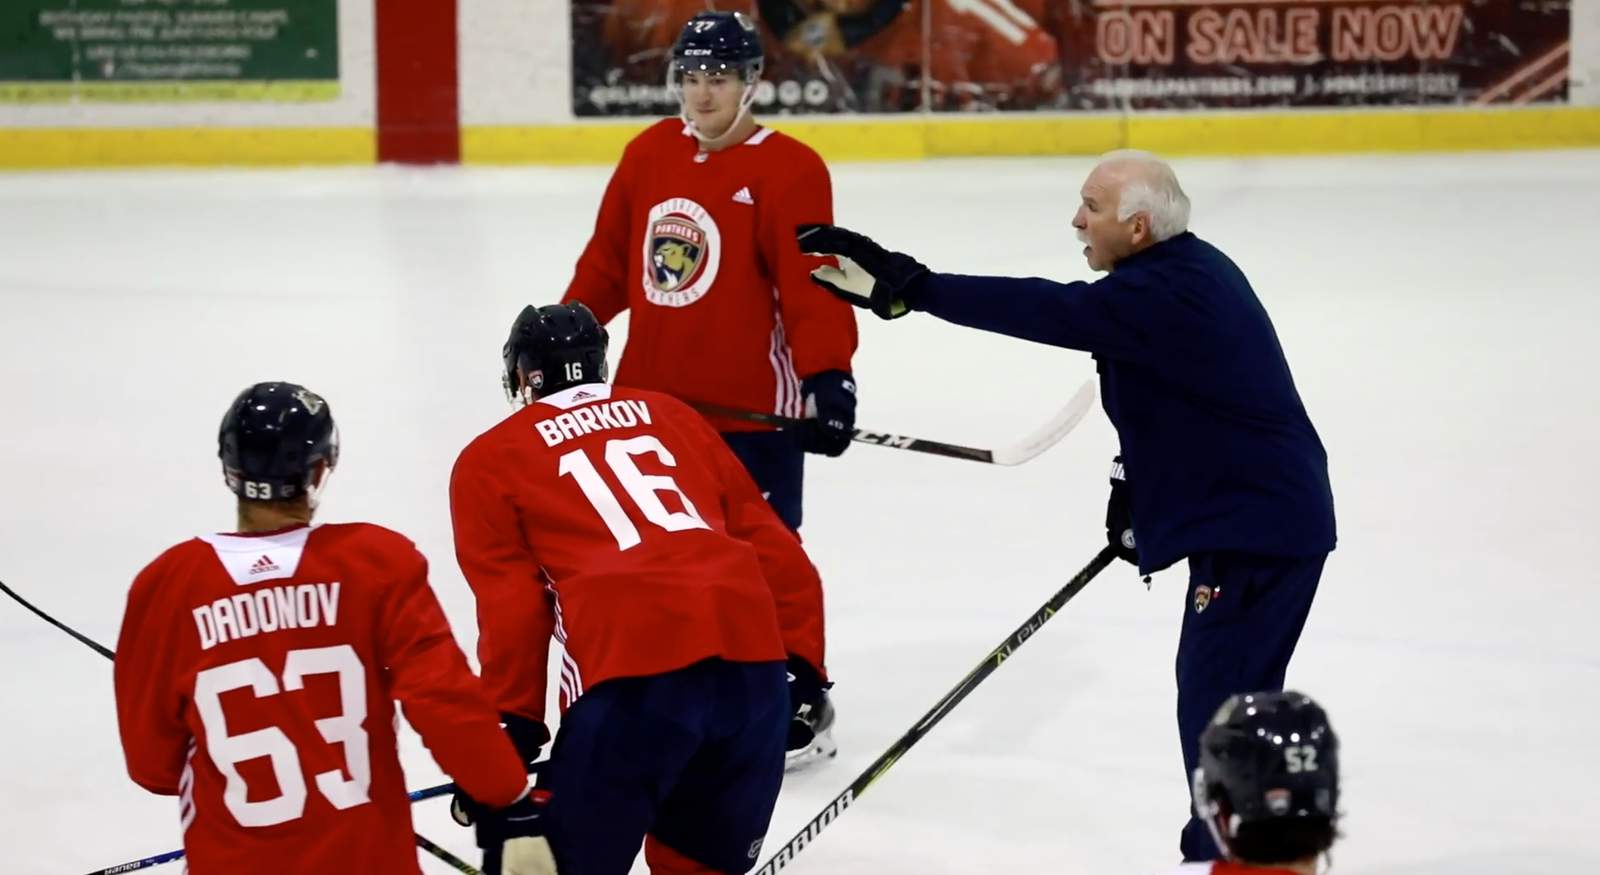 Thats a wrap: Panthers conclude postseason training camp, excited for challenge waiting in Toronto bubble